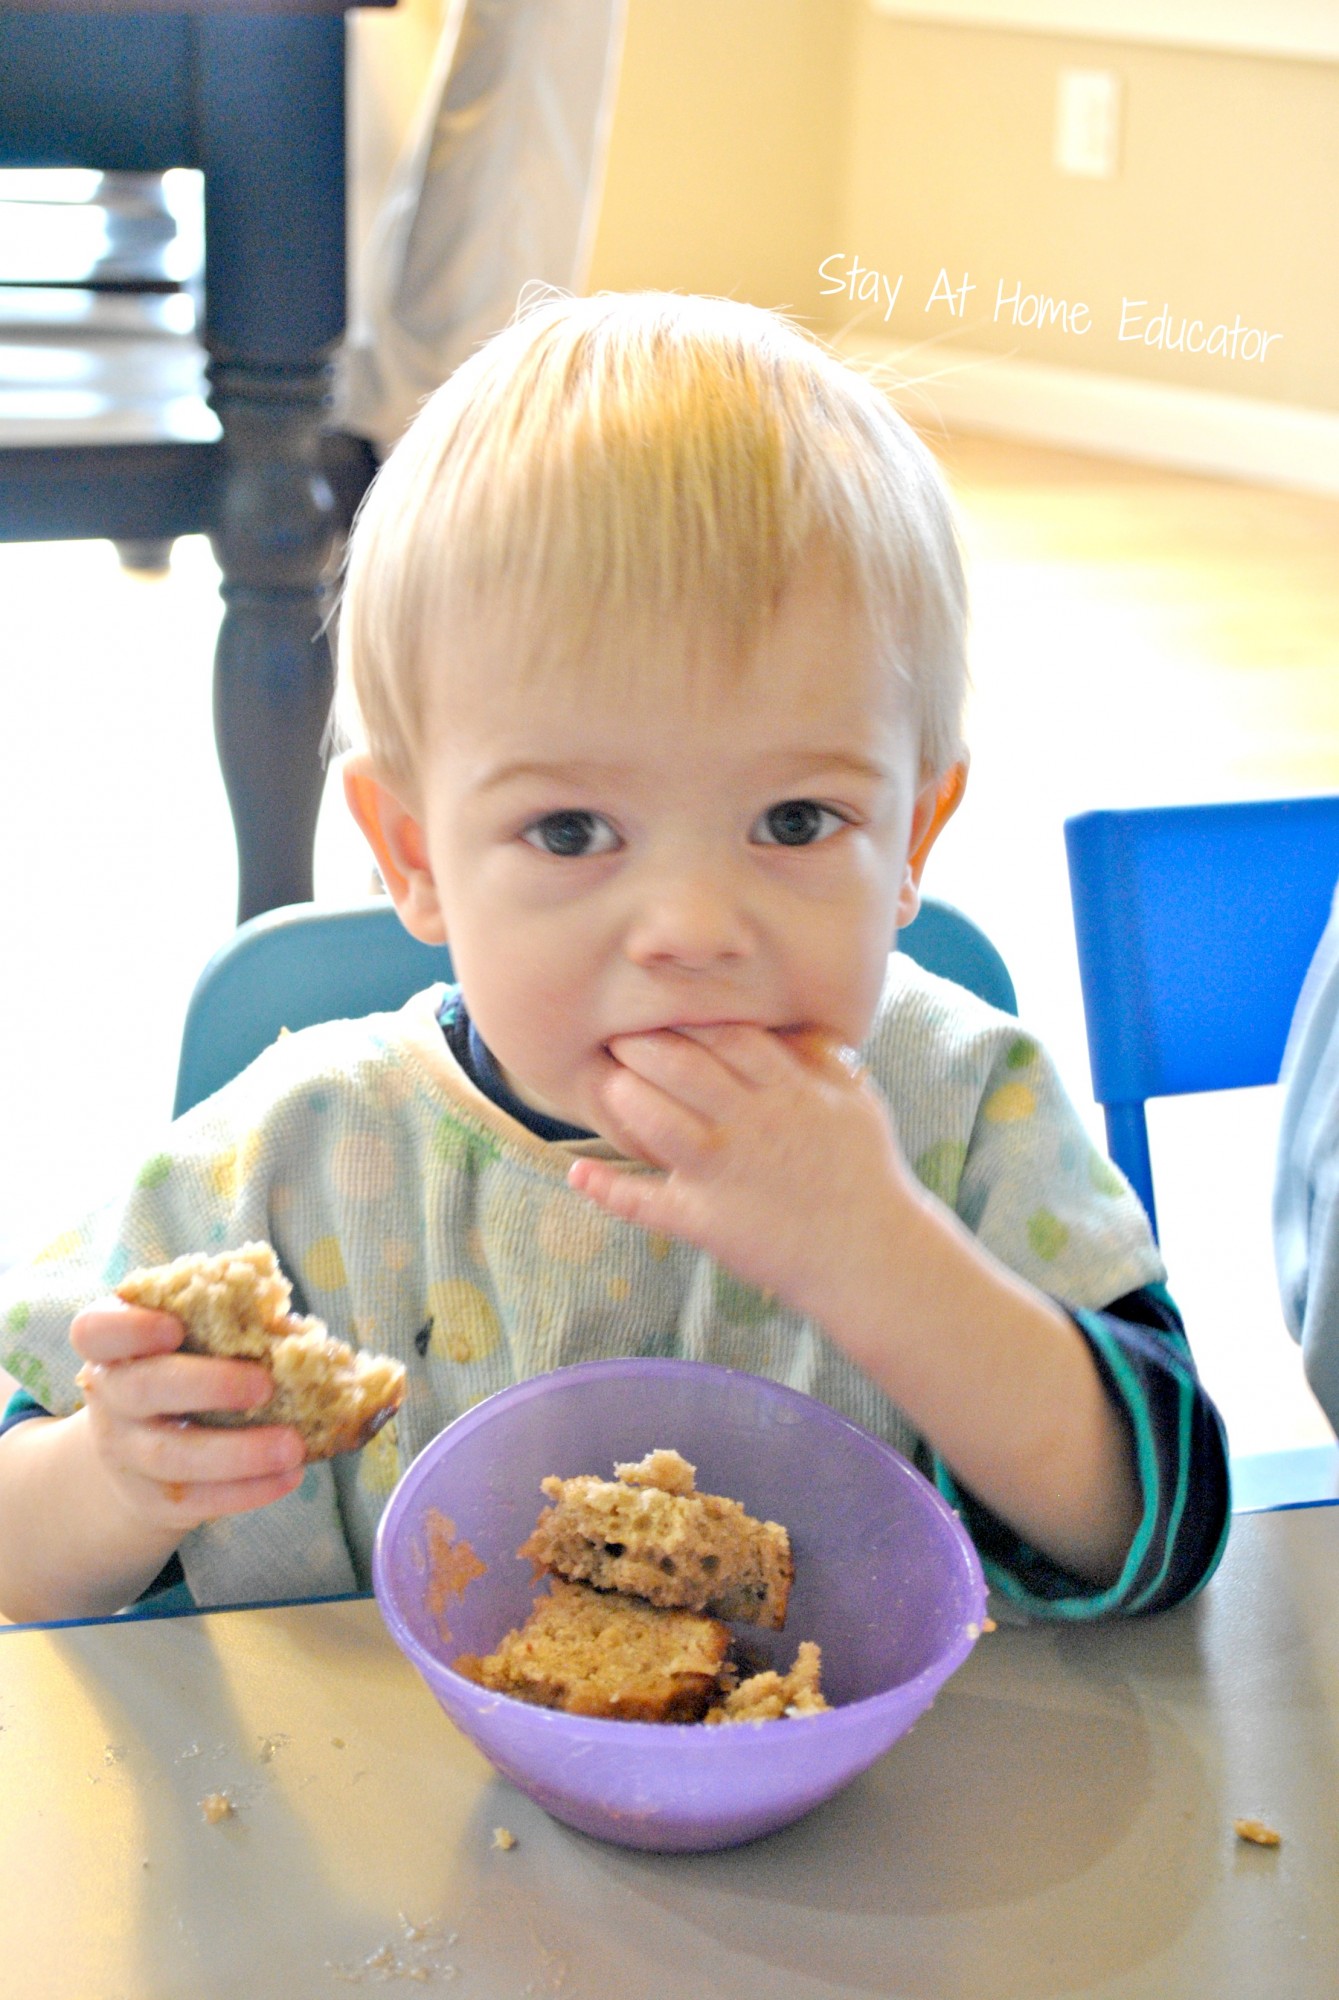 cooking with toddlers - Stay At Home Educator